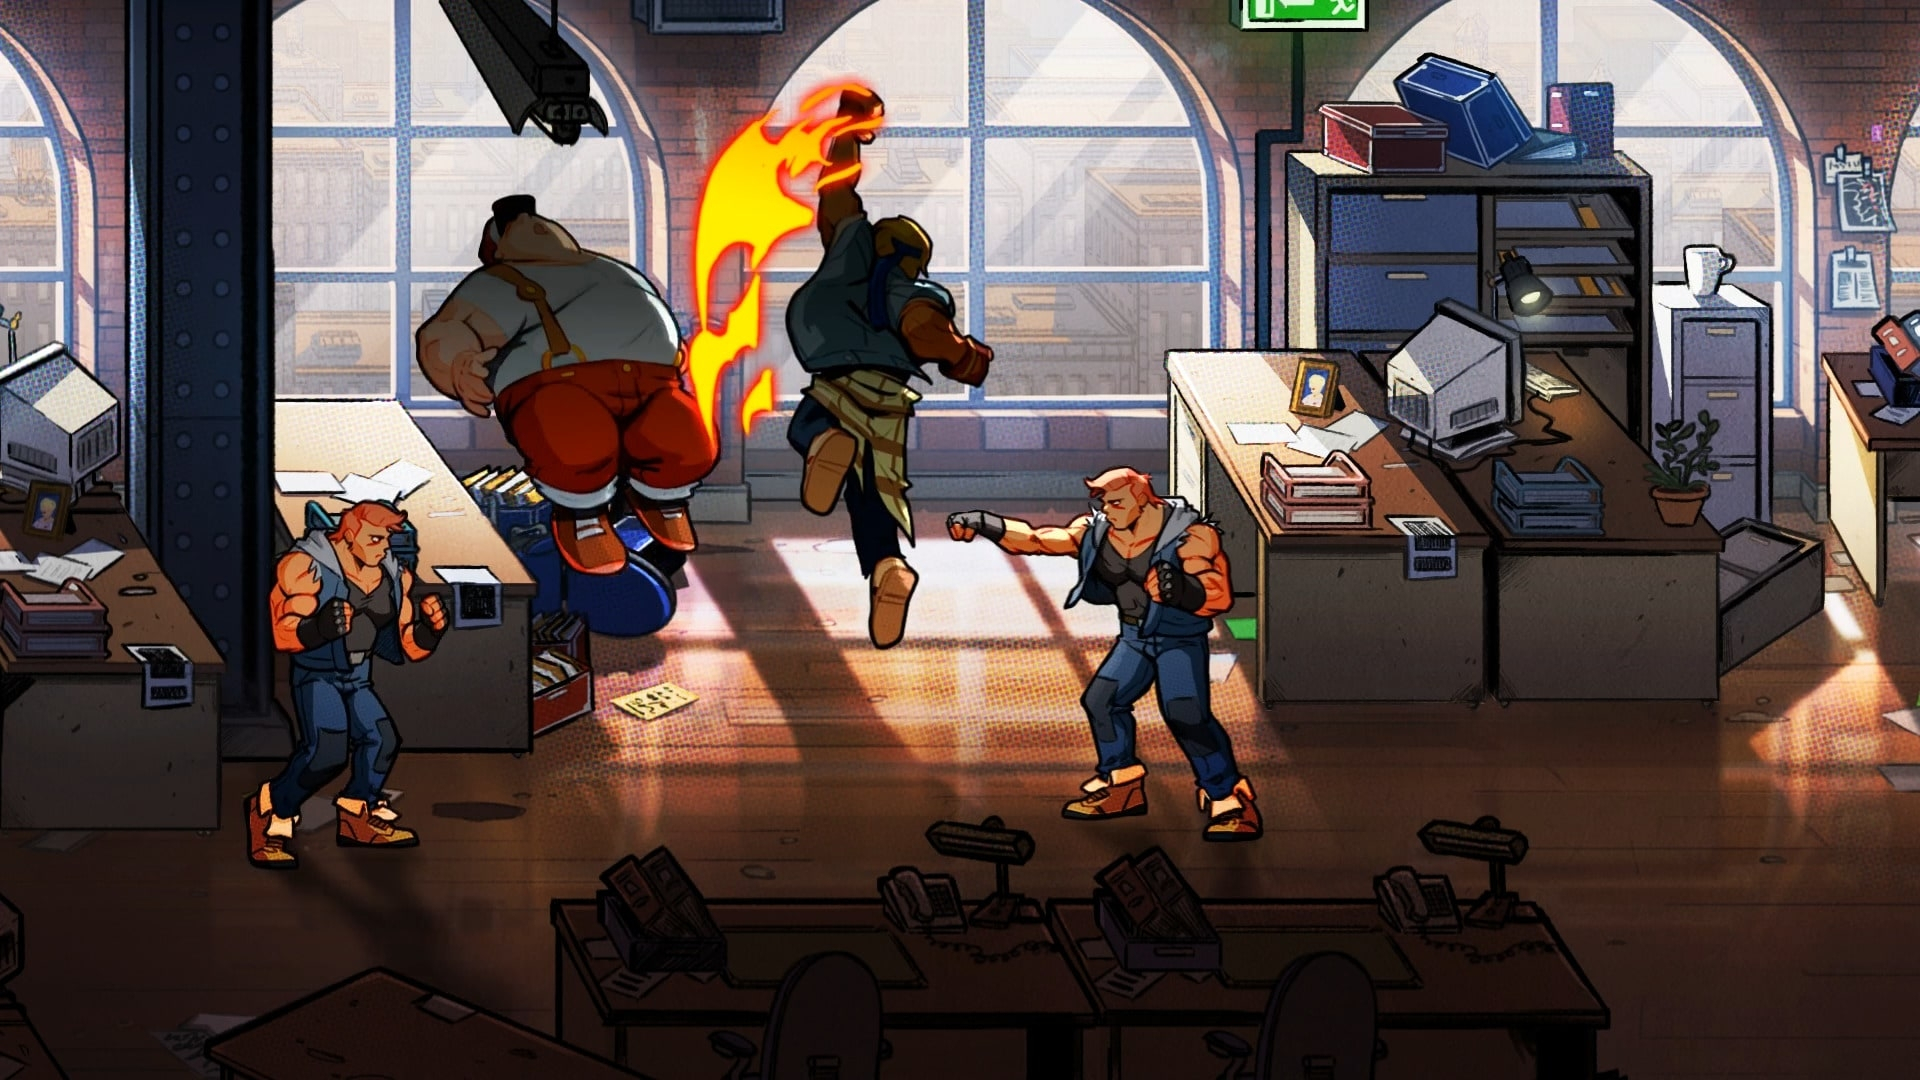 1920x1080 Download Streets Of Rage 4, In-game Screenshot, Fighting Games Wallpapers for Widescree